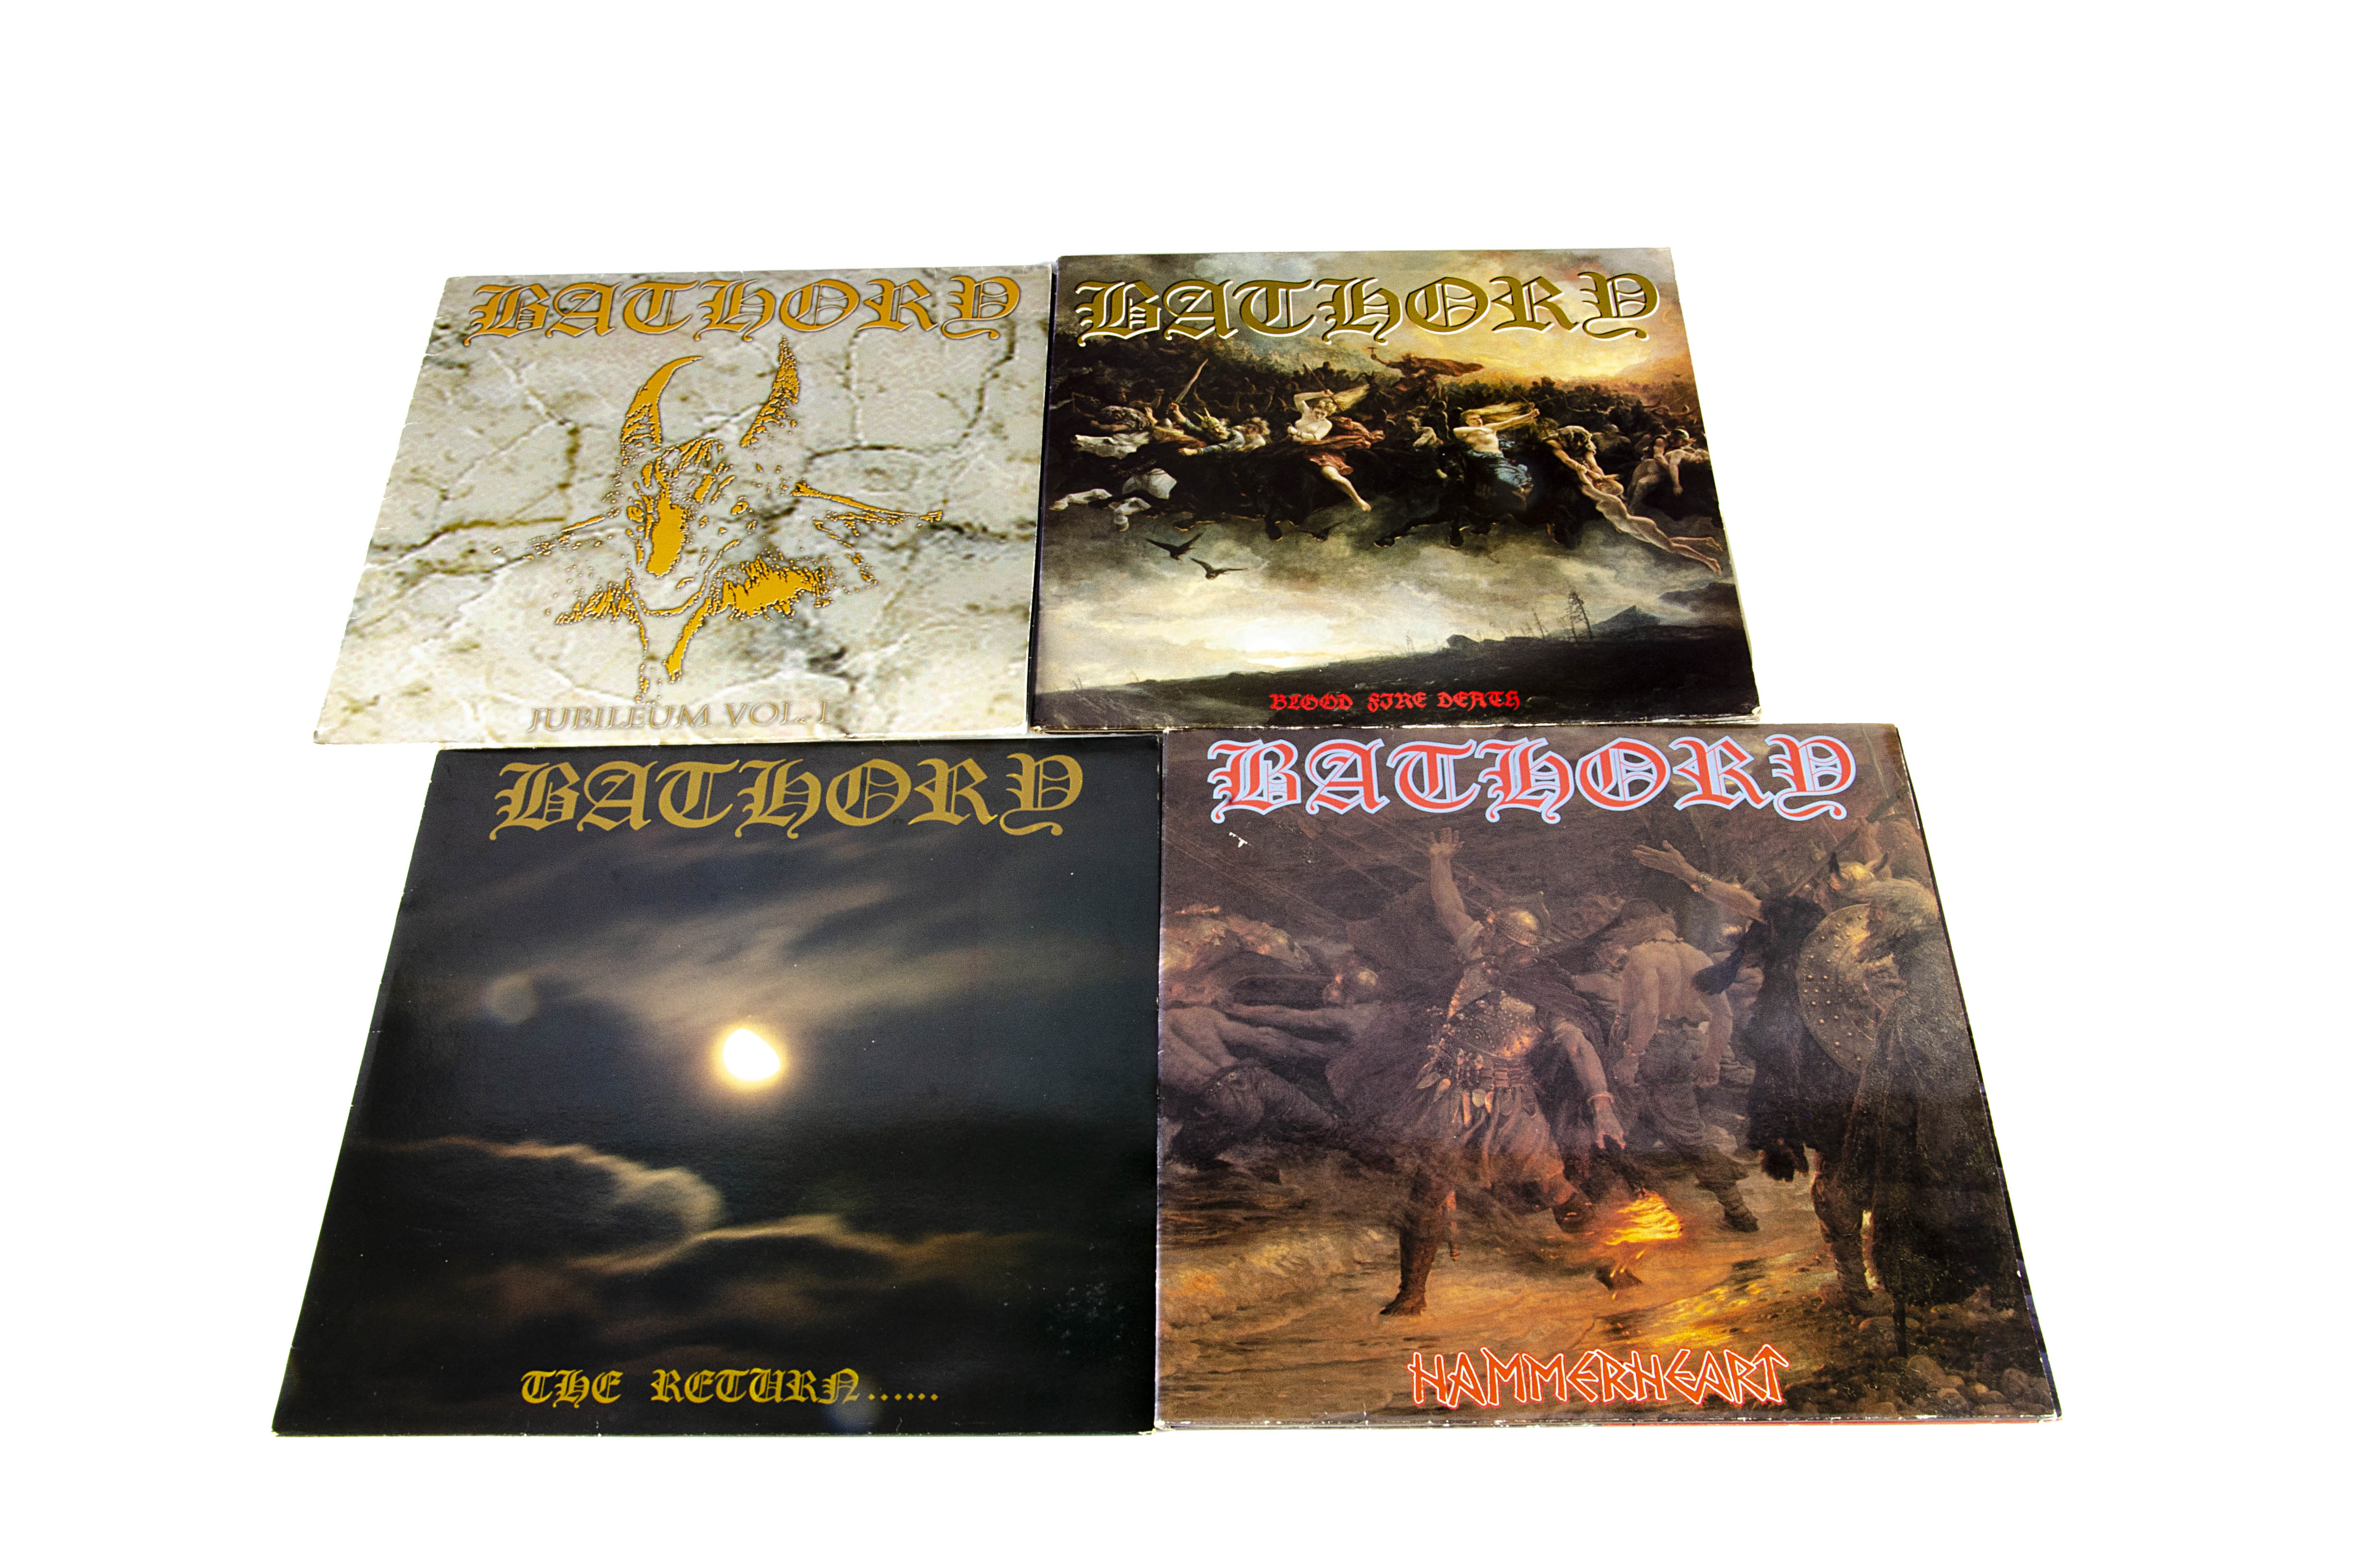 Bathory LPs, four albums comprising The Return (FLAG 9 - With Inner EX/EX), Hammerheart (N 0153-